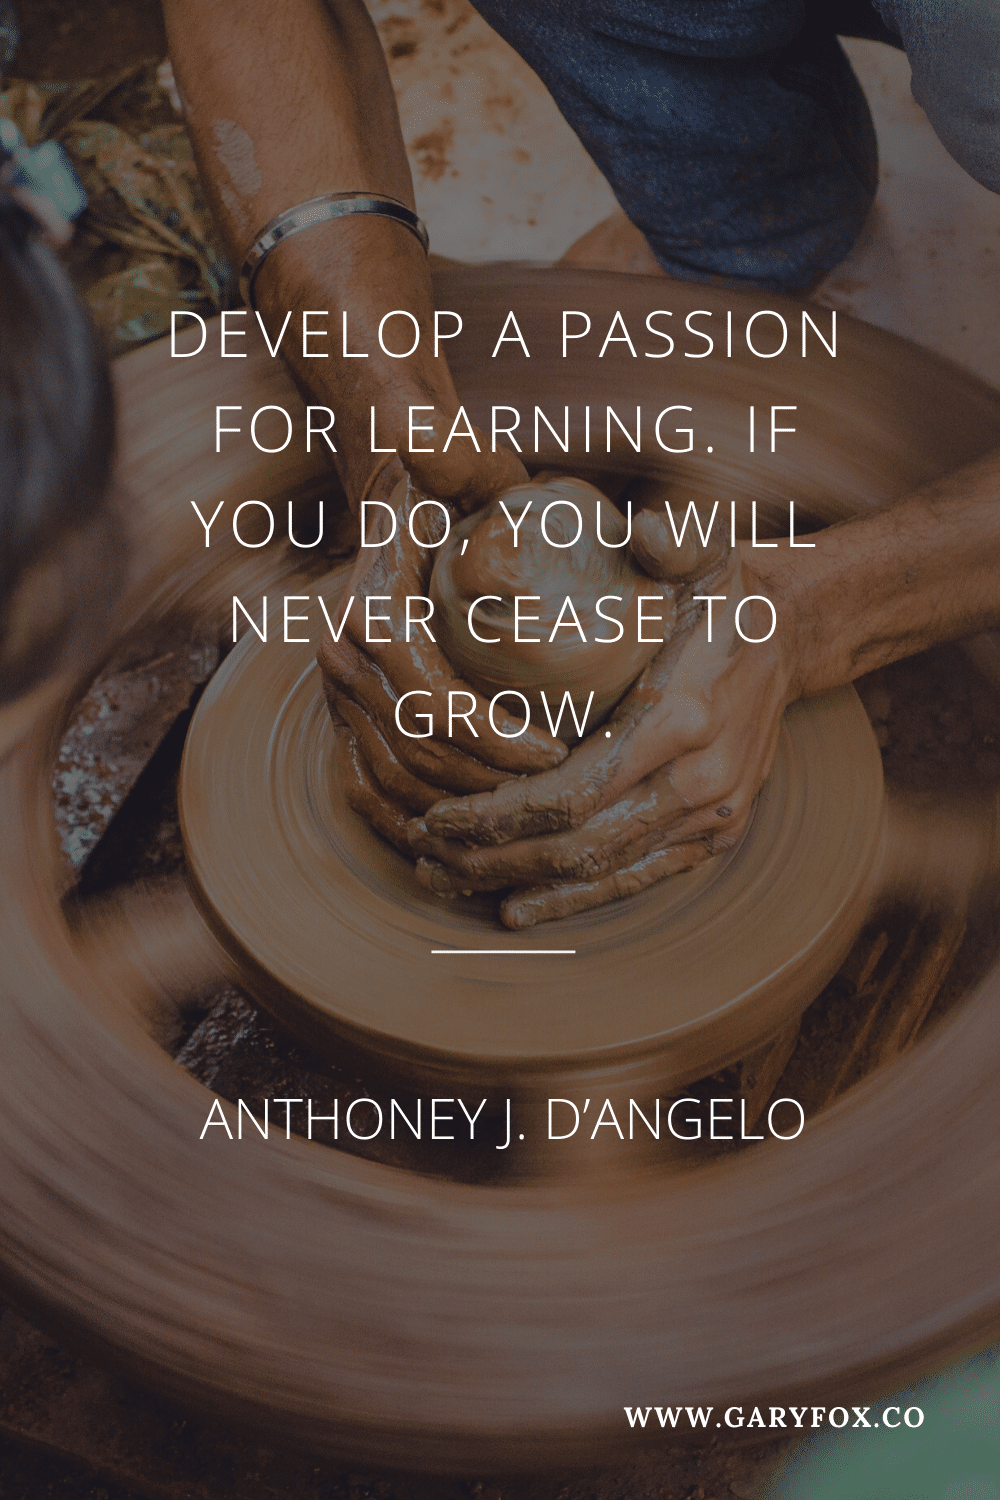 Develop A Passion For Learning. If You Do, You Will Never Cease To Grow. - Anthony J. D’angelo